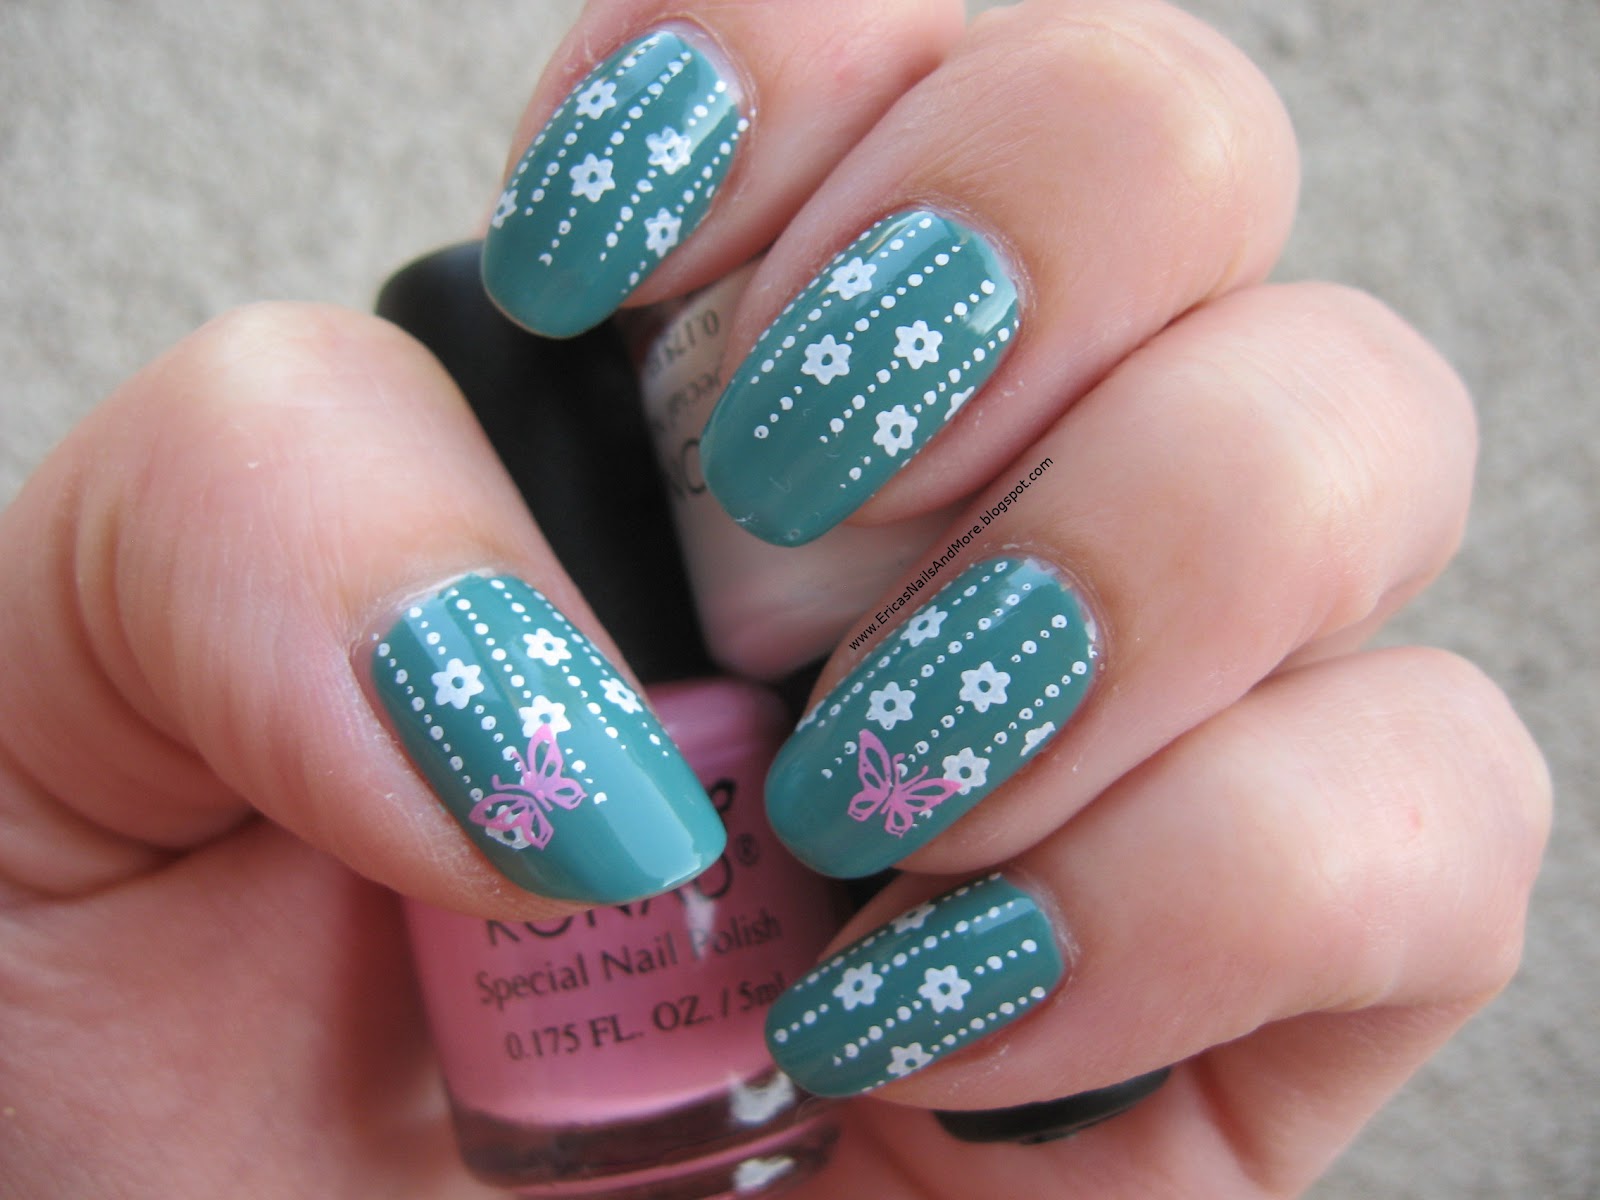 8. How to Prep Your Nails for Stamping Designs - wide 6